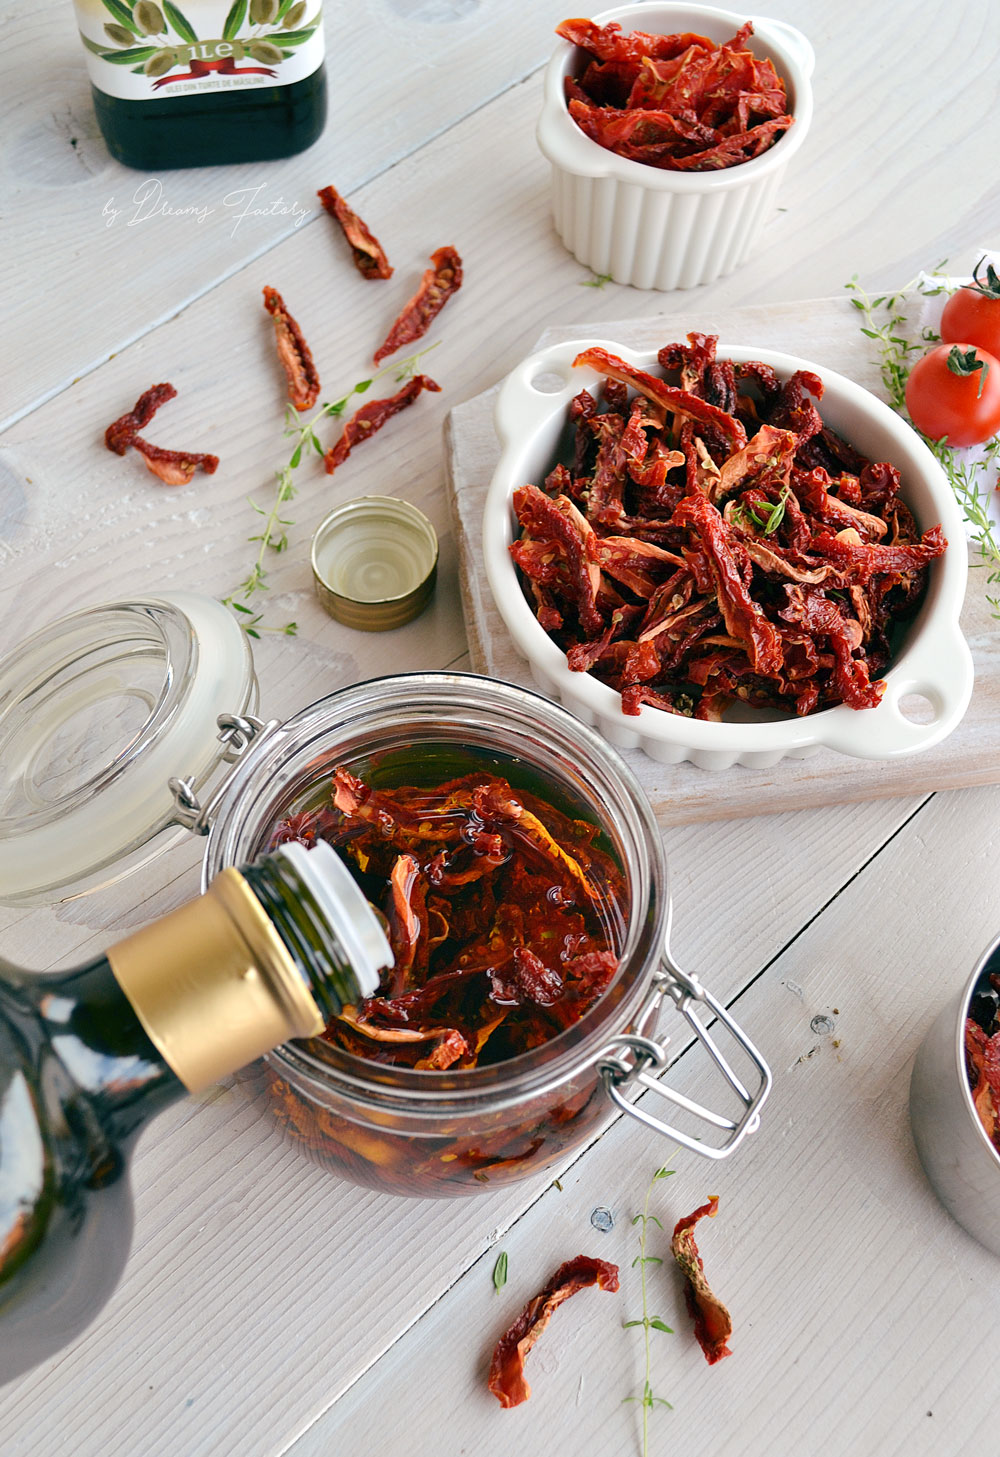 Make these healthy and insanely delicious sun-dried tomatoes with aromatic herbs following these simple steps! www.bydreamsfactory.com